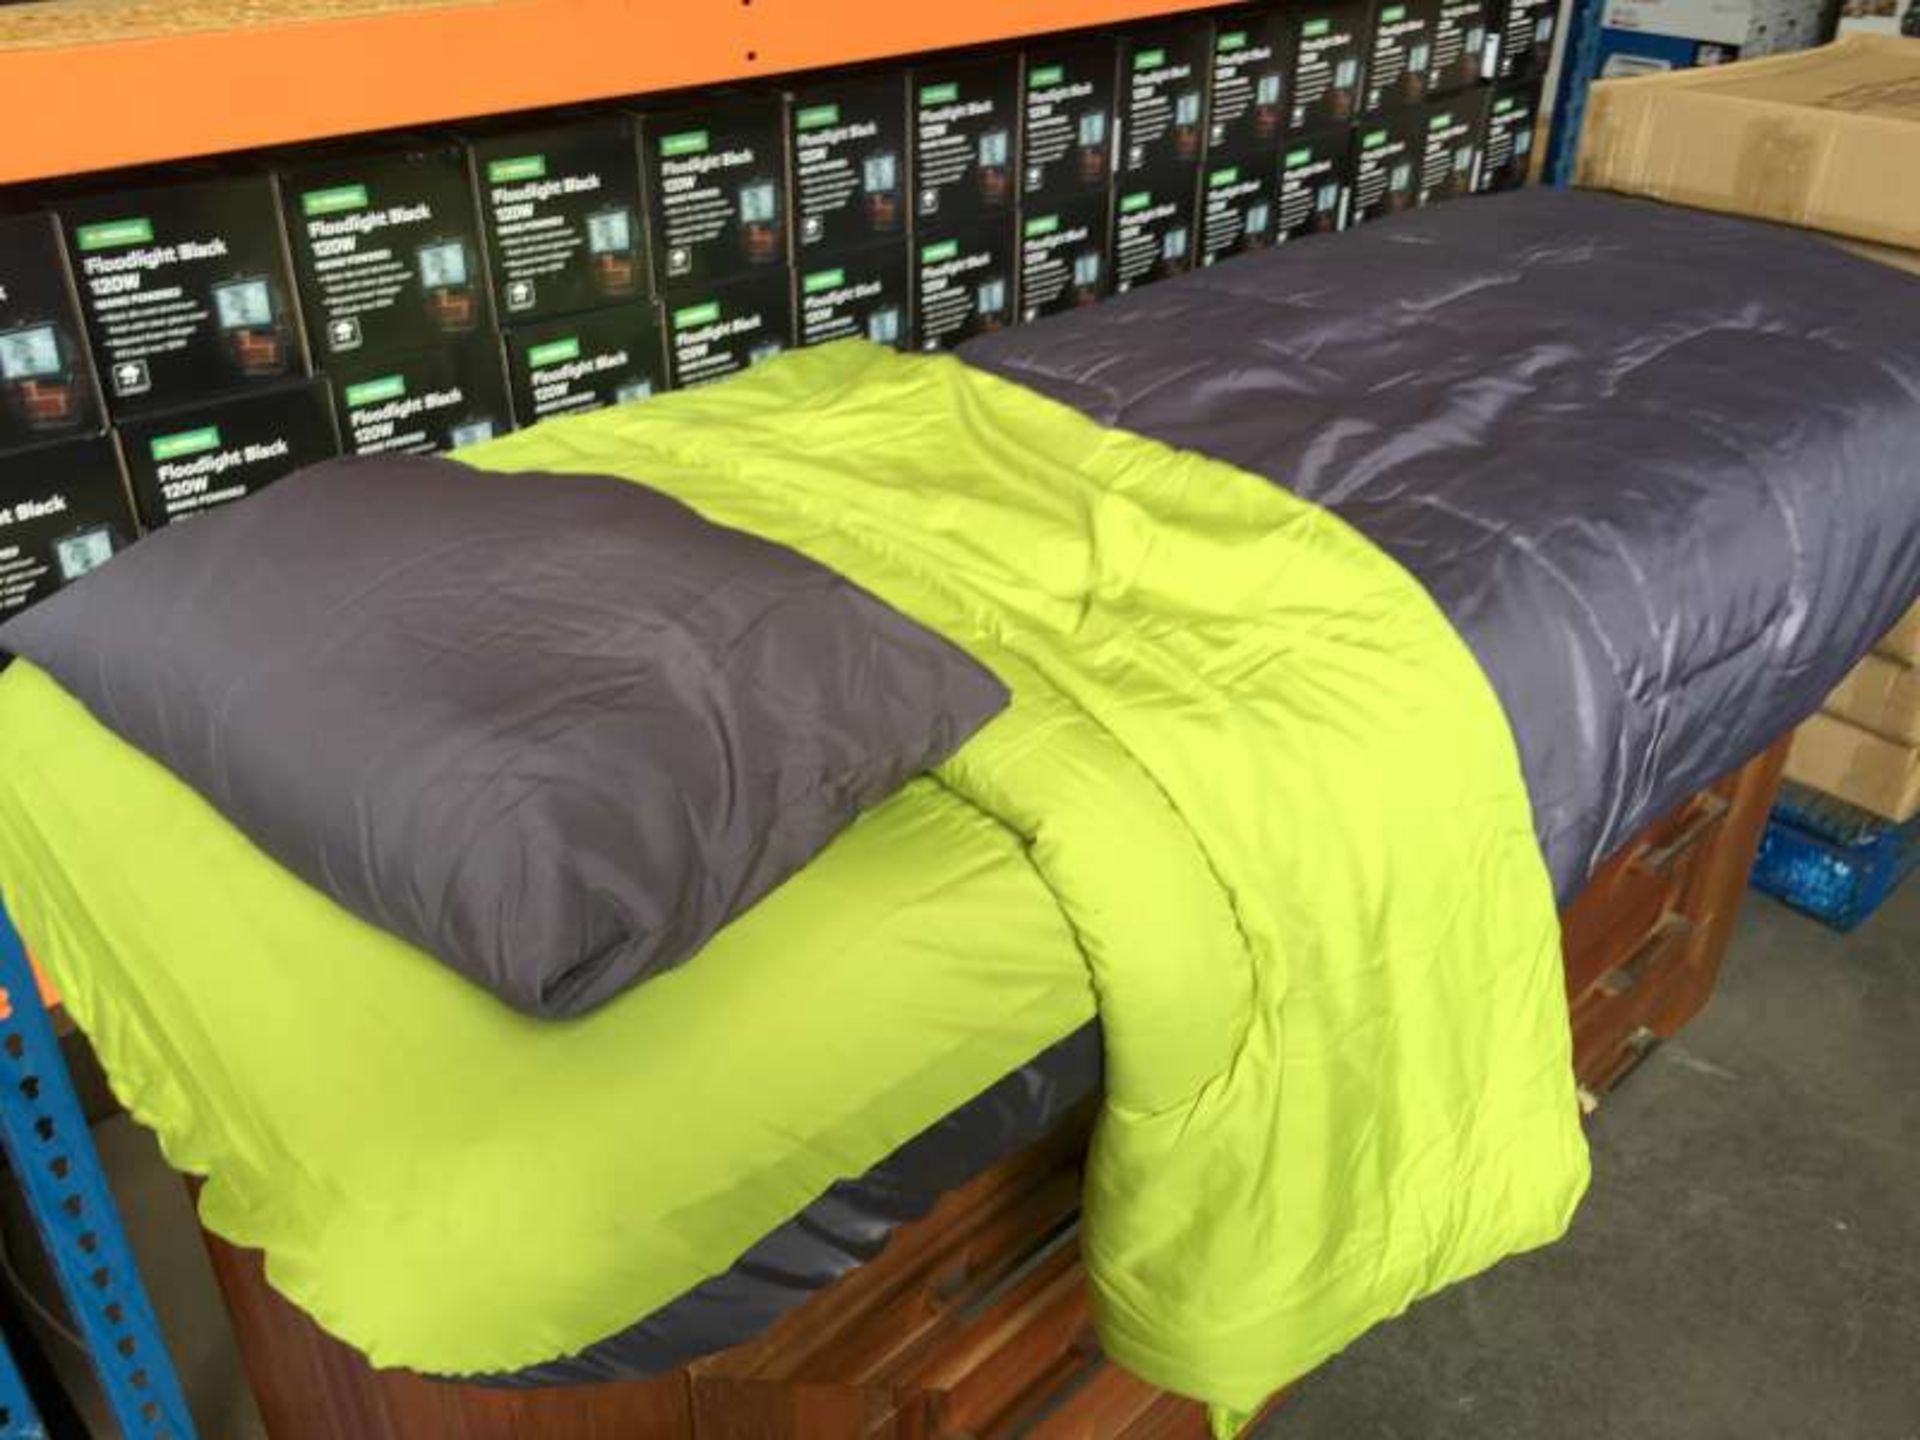 10 X INDOOR / OUTDOOR 4 PIECE SINGLE BED SETS EACH SET CONTAINS AIRBED / AIRBED COVER / PILLOW / BED